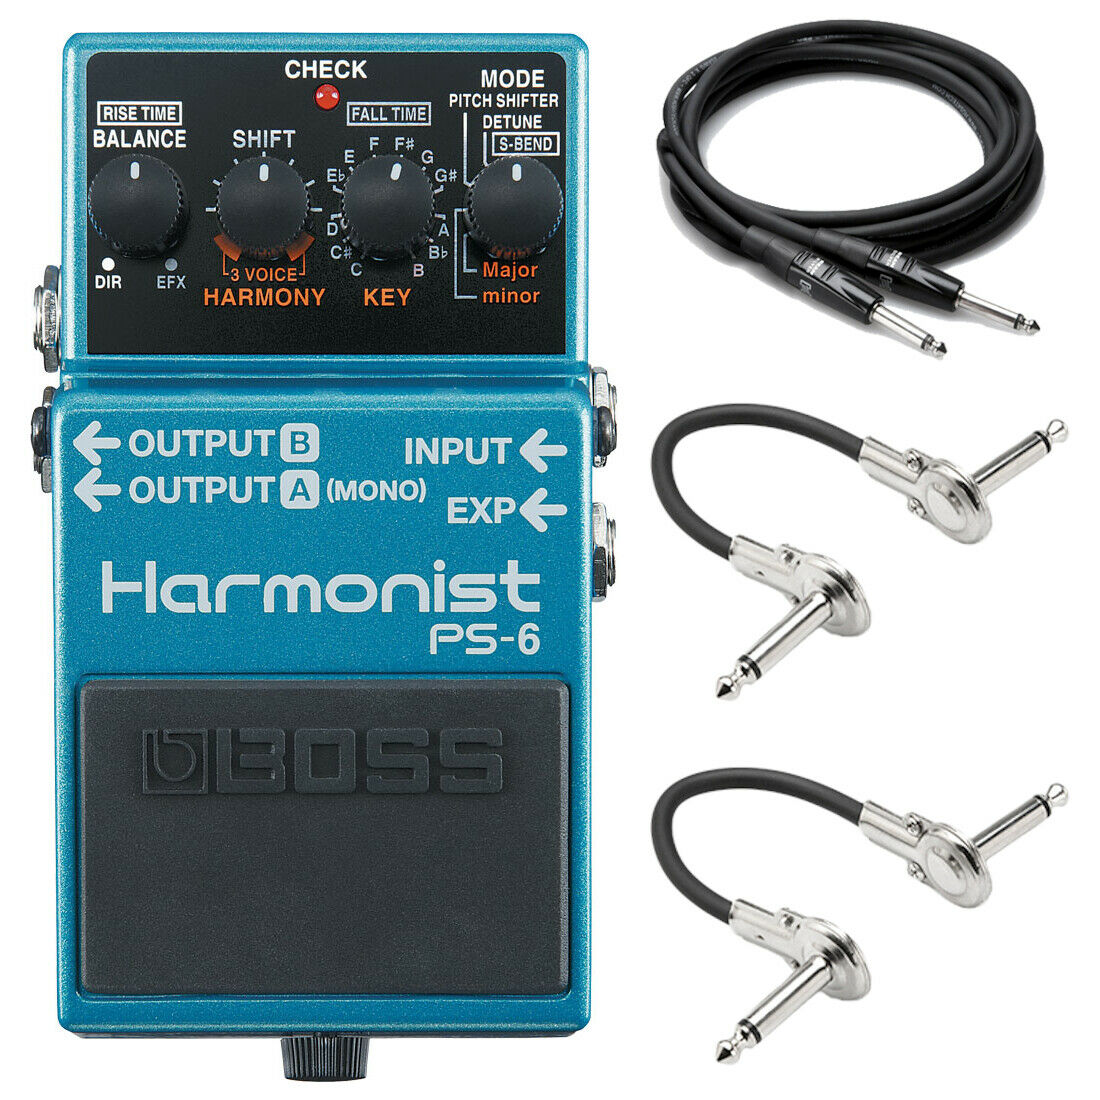 New Boss Ps-6 Harmonist Pitch Shifter Guitar Effects Pedal